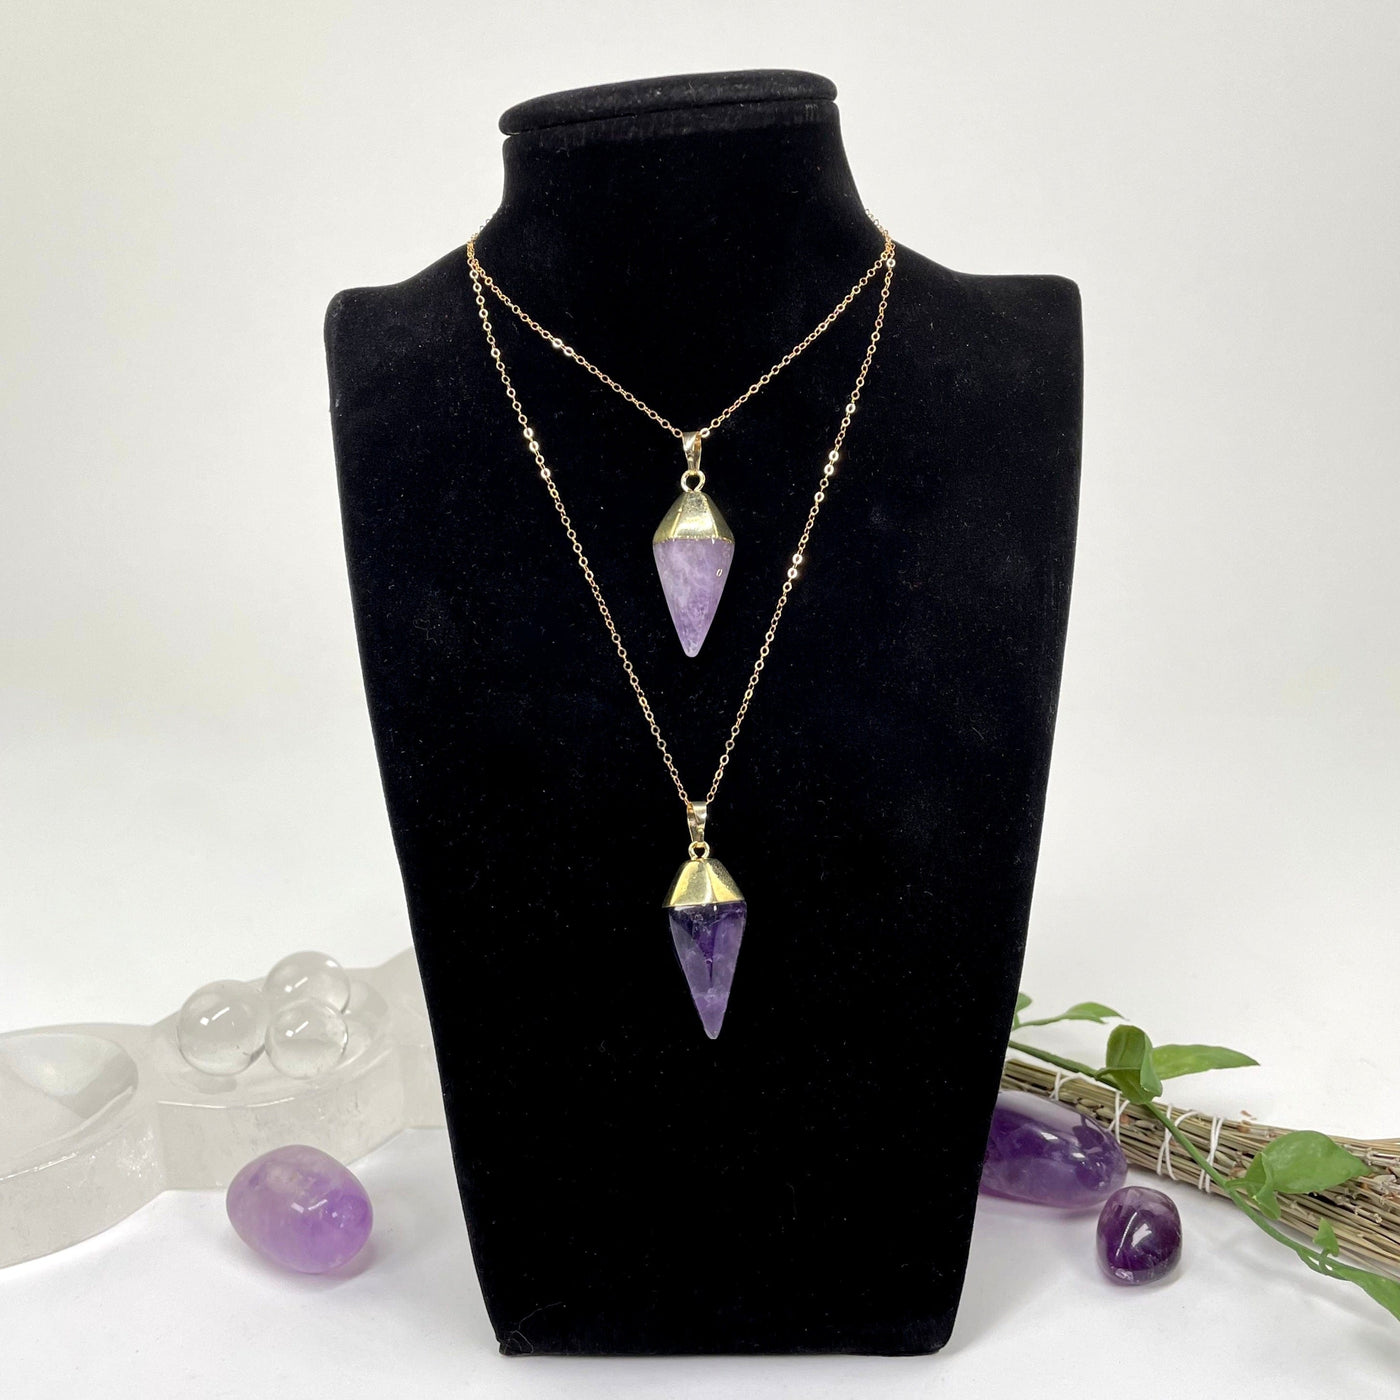 two amethyst quartz spear pendants on a chain at two different lengths on a bust display